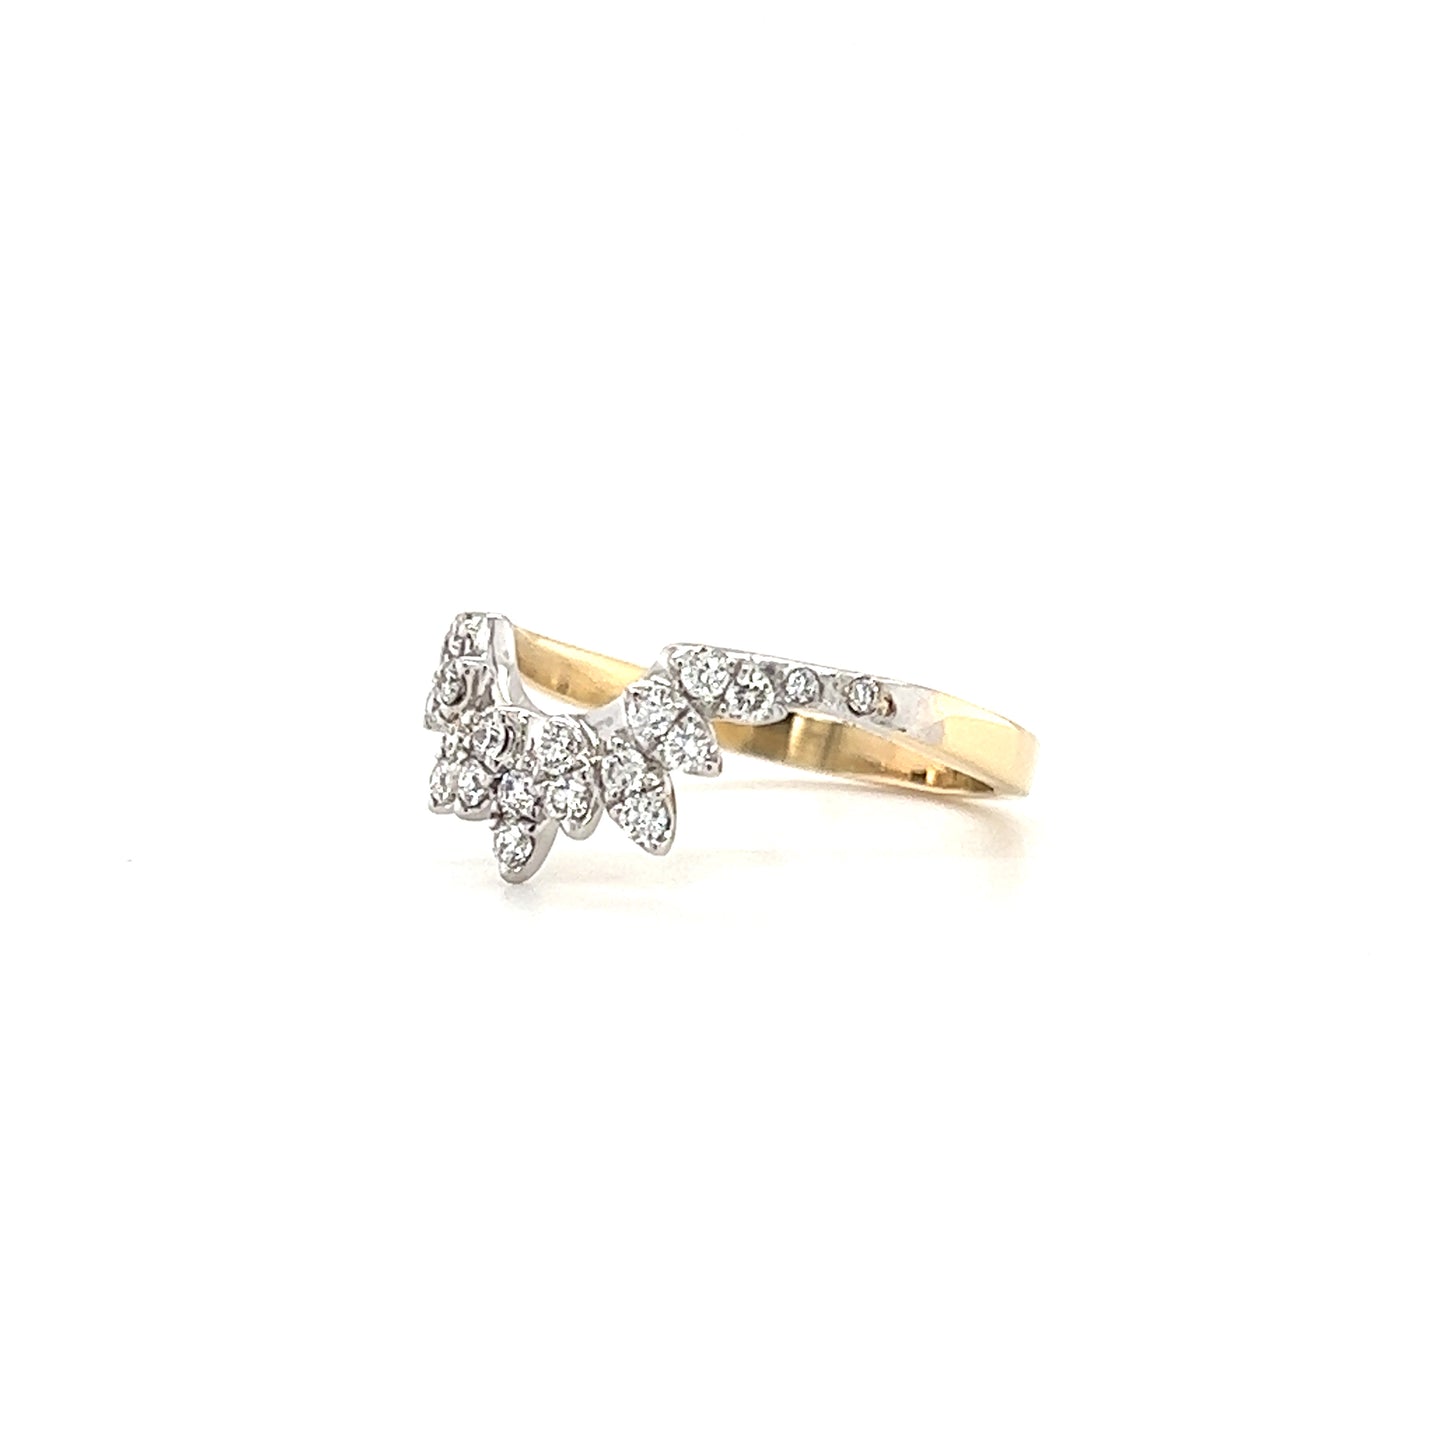 Sunburst Diamond Ring with Twenty-Two Diamond in 14K Yellow and White Gold Right Side View